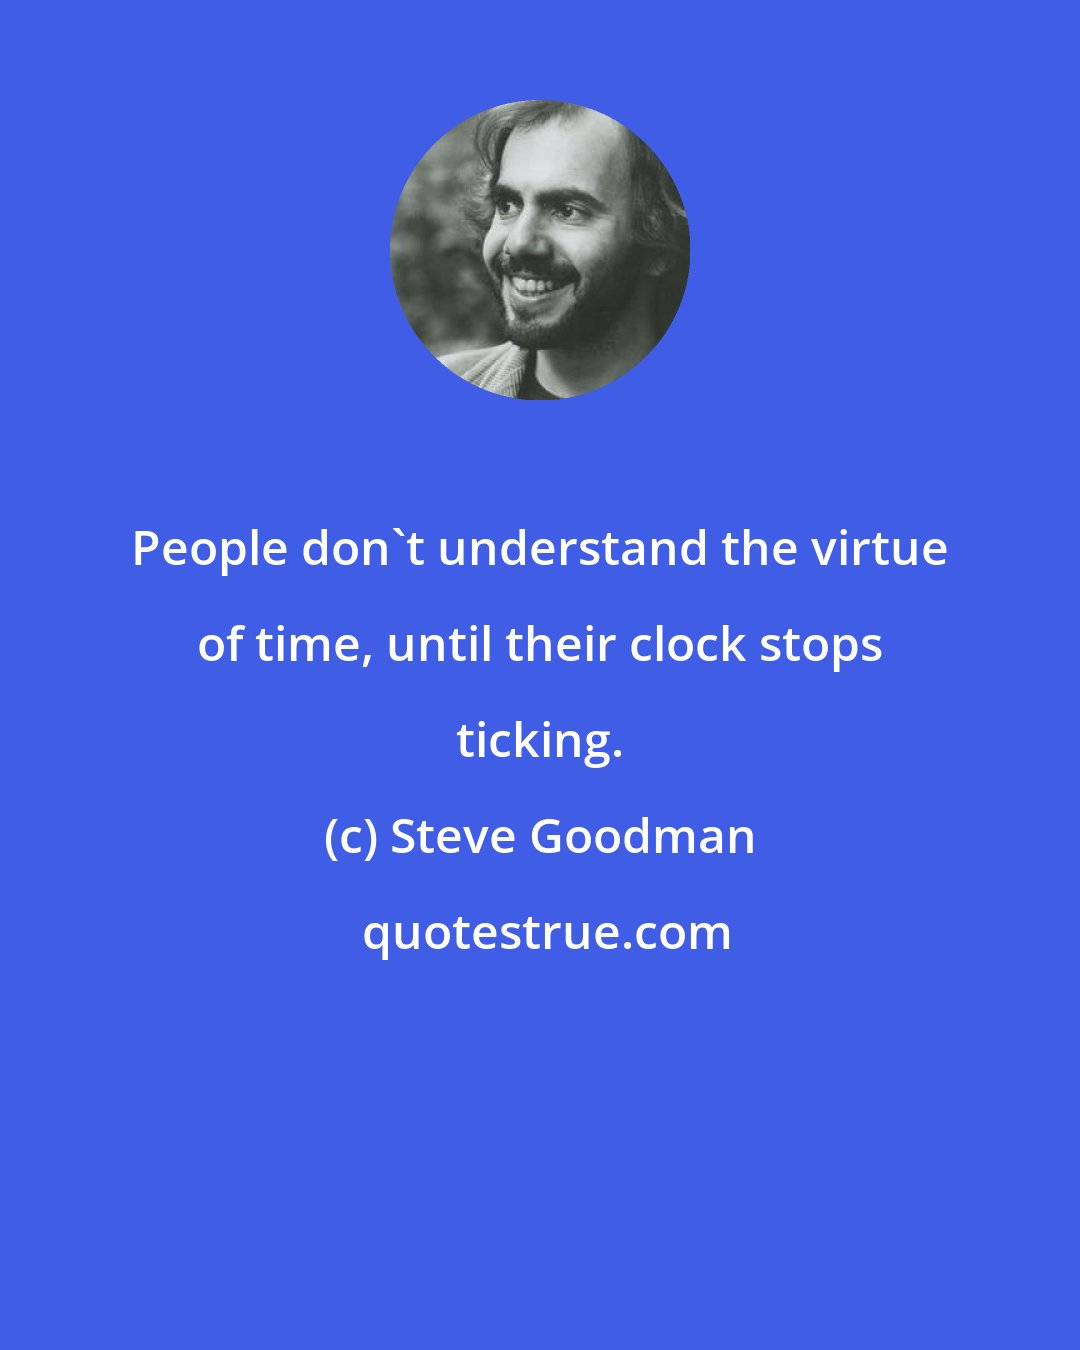 Steve Goodman: People don't understand the virtue of time, until their clock stops ticking.